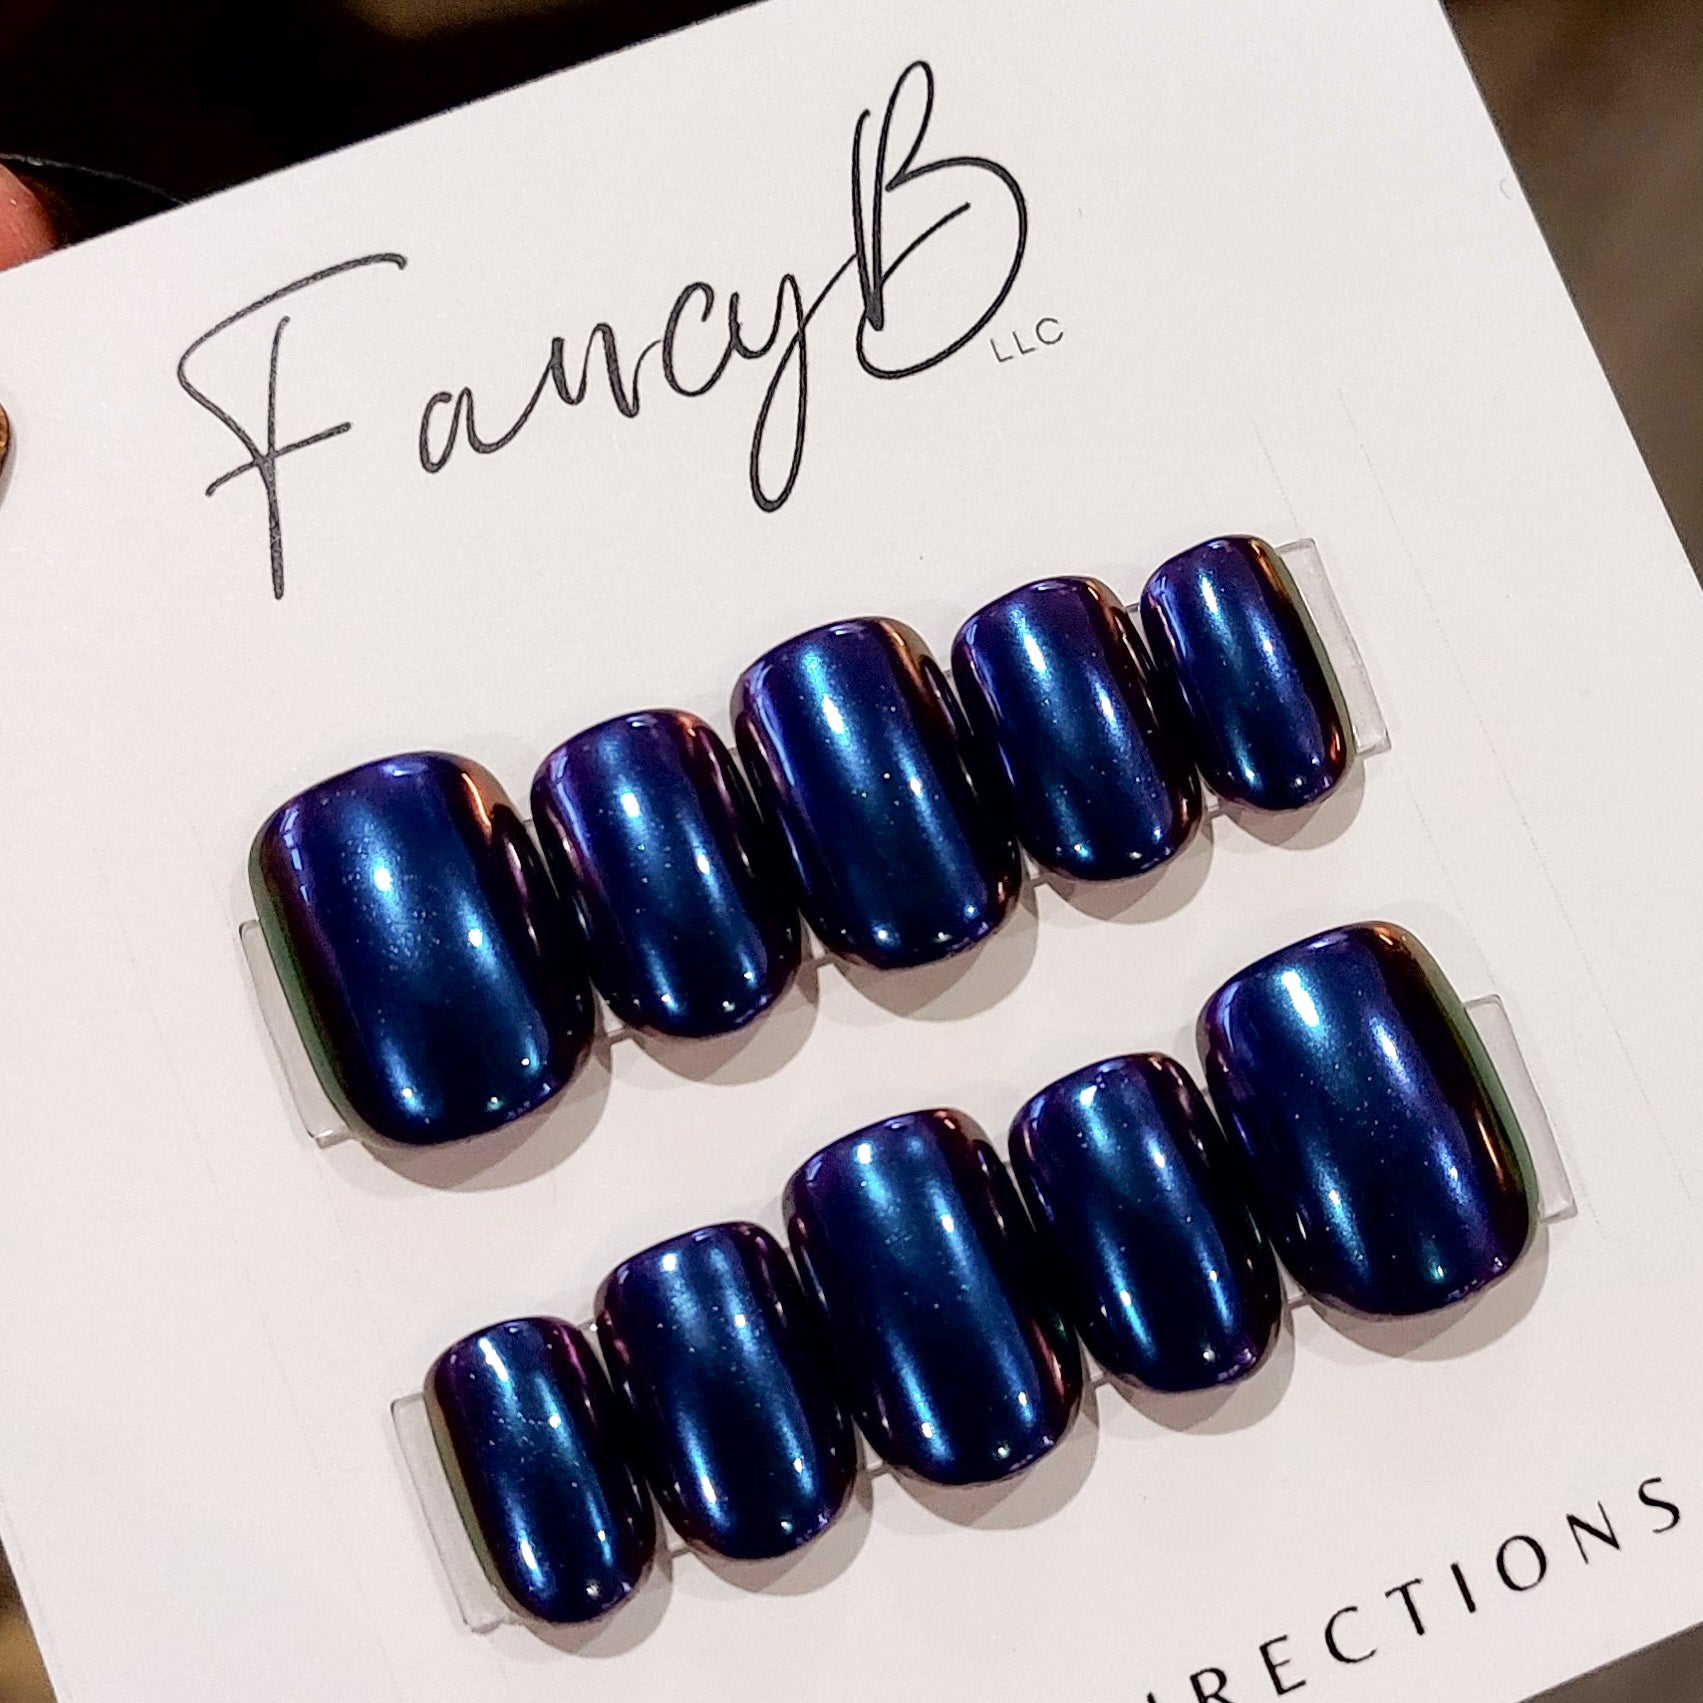 Custom chrome press on nails with purple and blue chameleon chrome on short square nails. FancyB Nails.